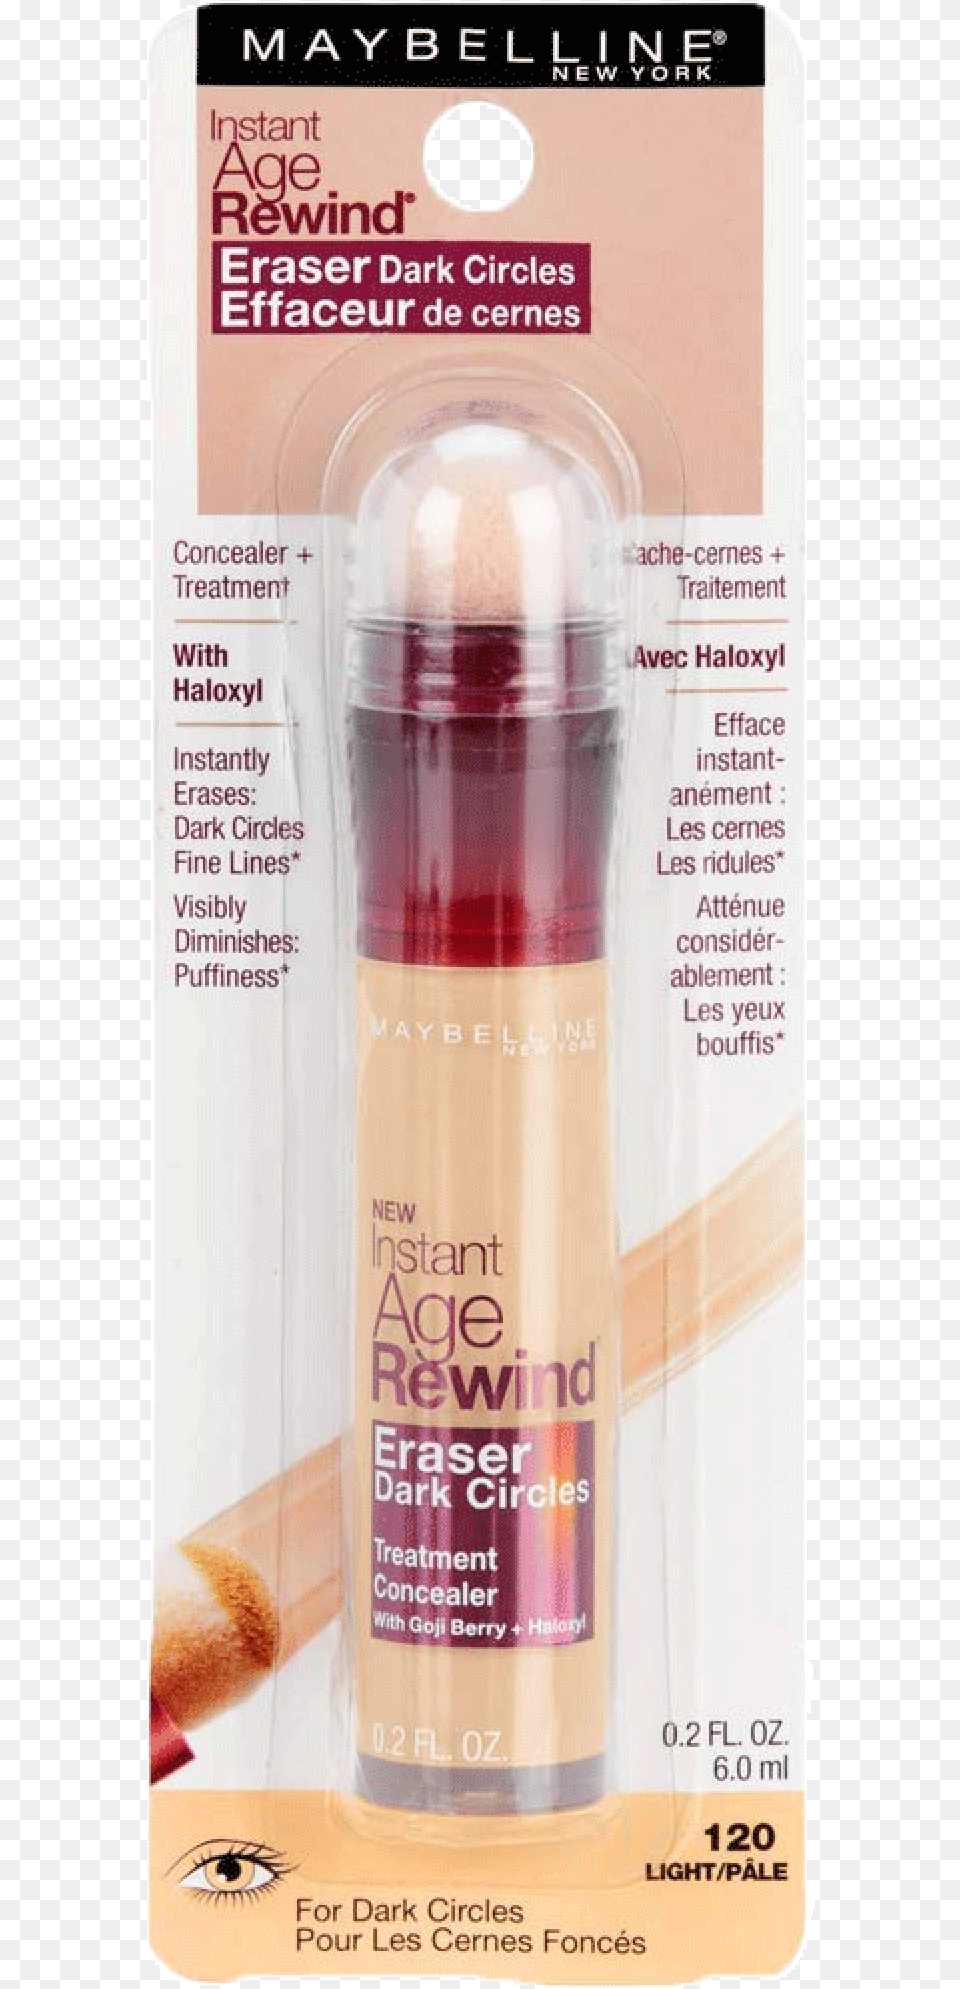 Maybelline Instant Age Rewind 120 Light Pale, Cosmetics, Bottle, Lipstick, Deodorant Free Png